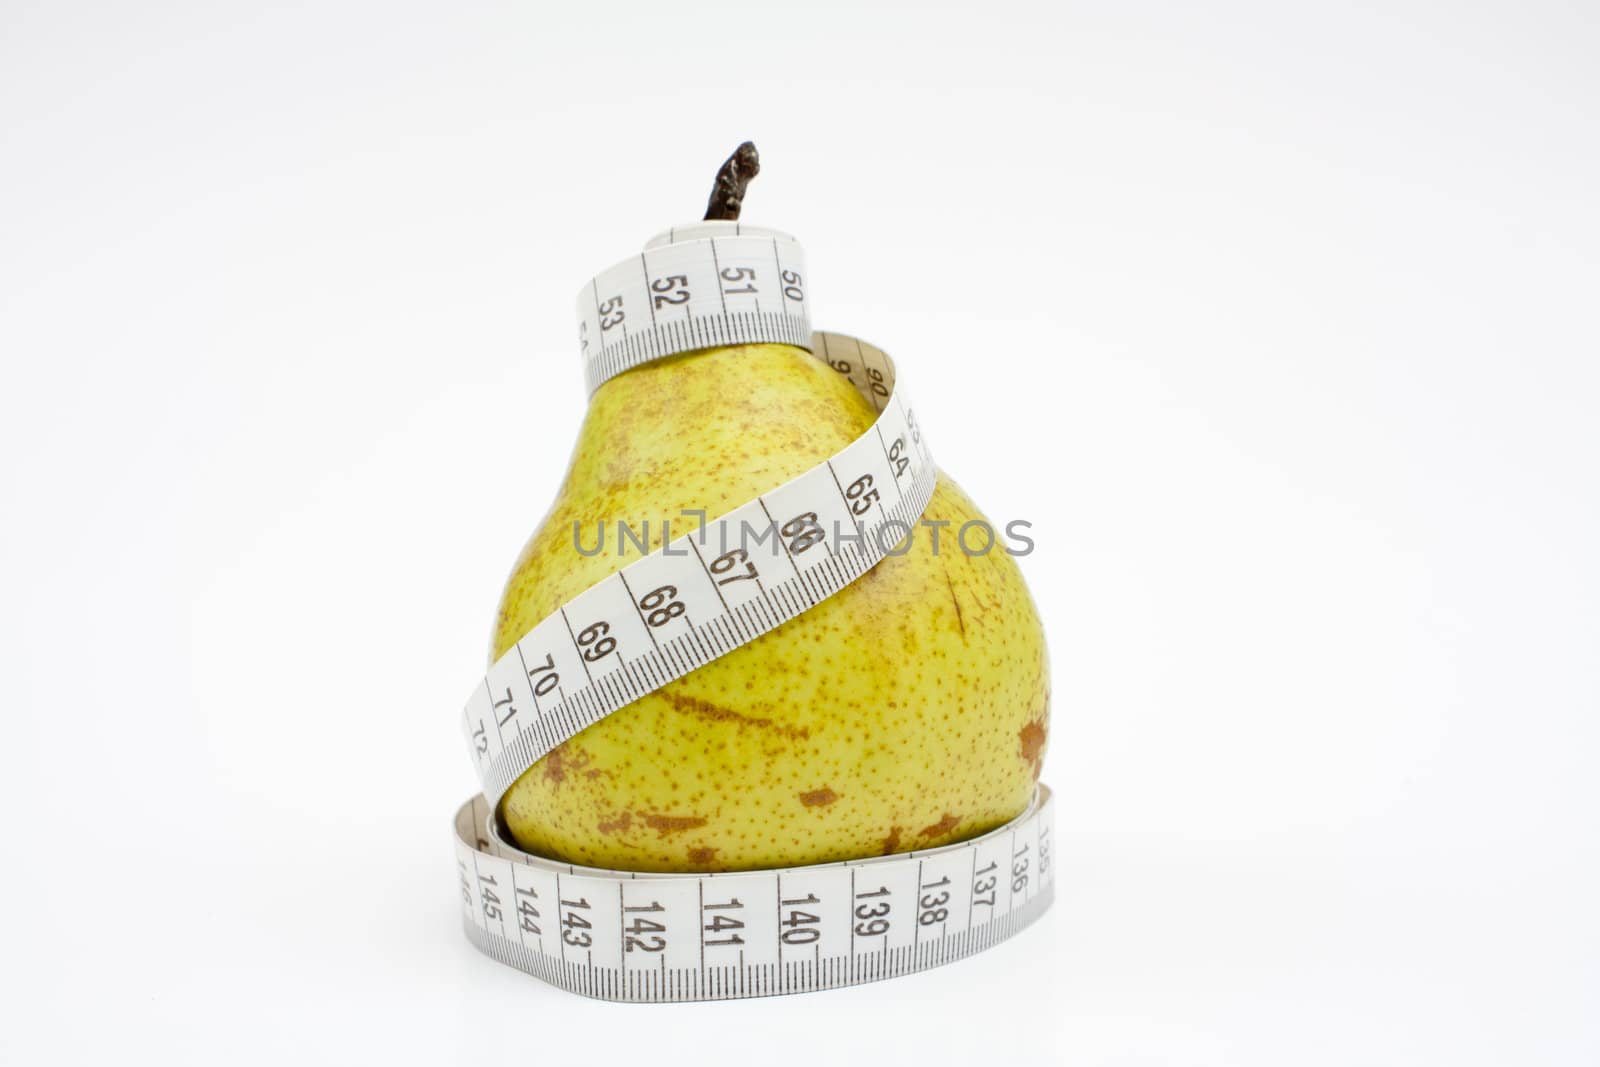 Tape measure wrapped around pear by aleksan